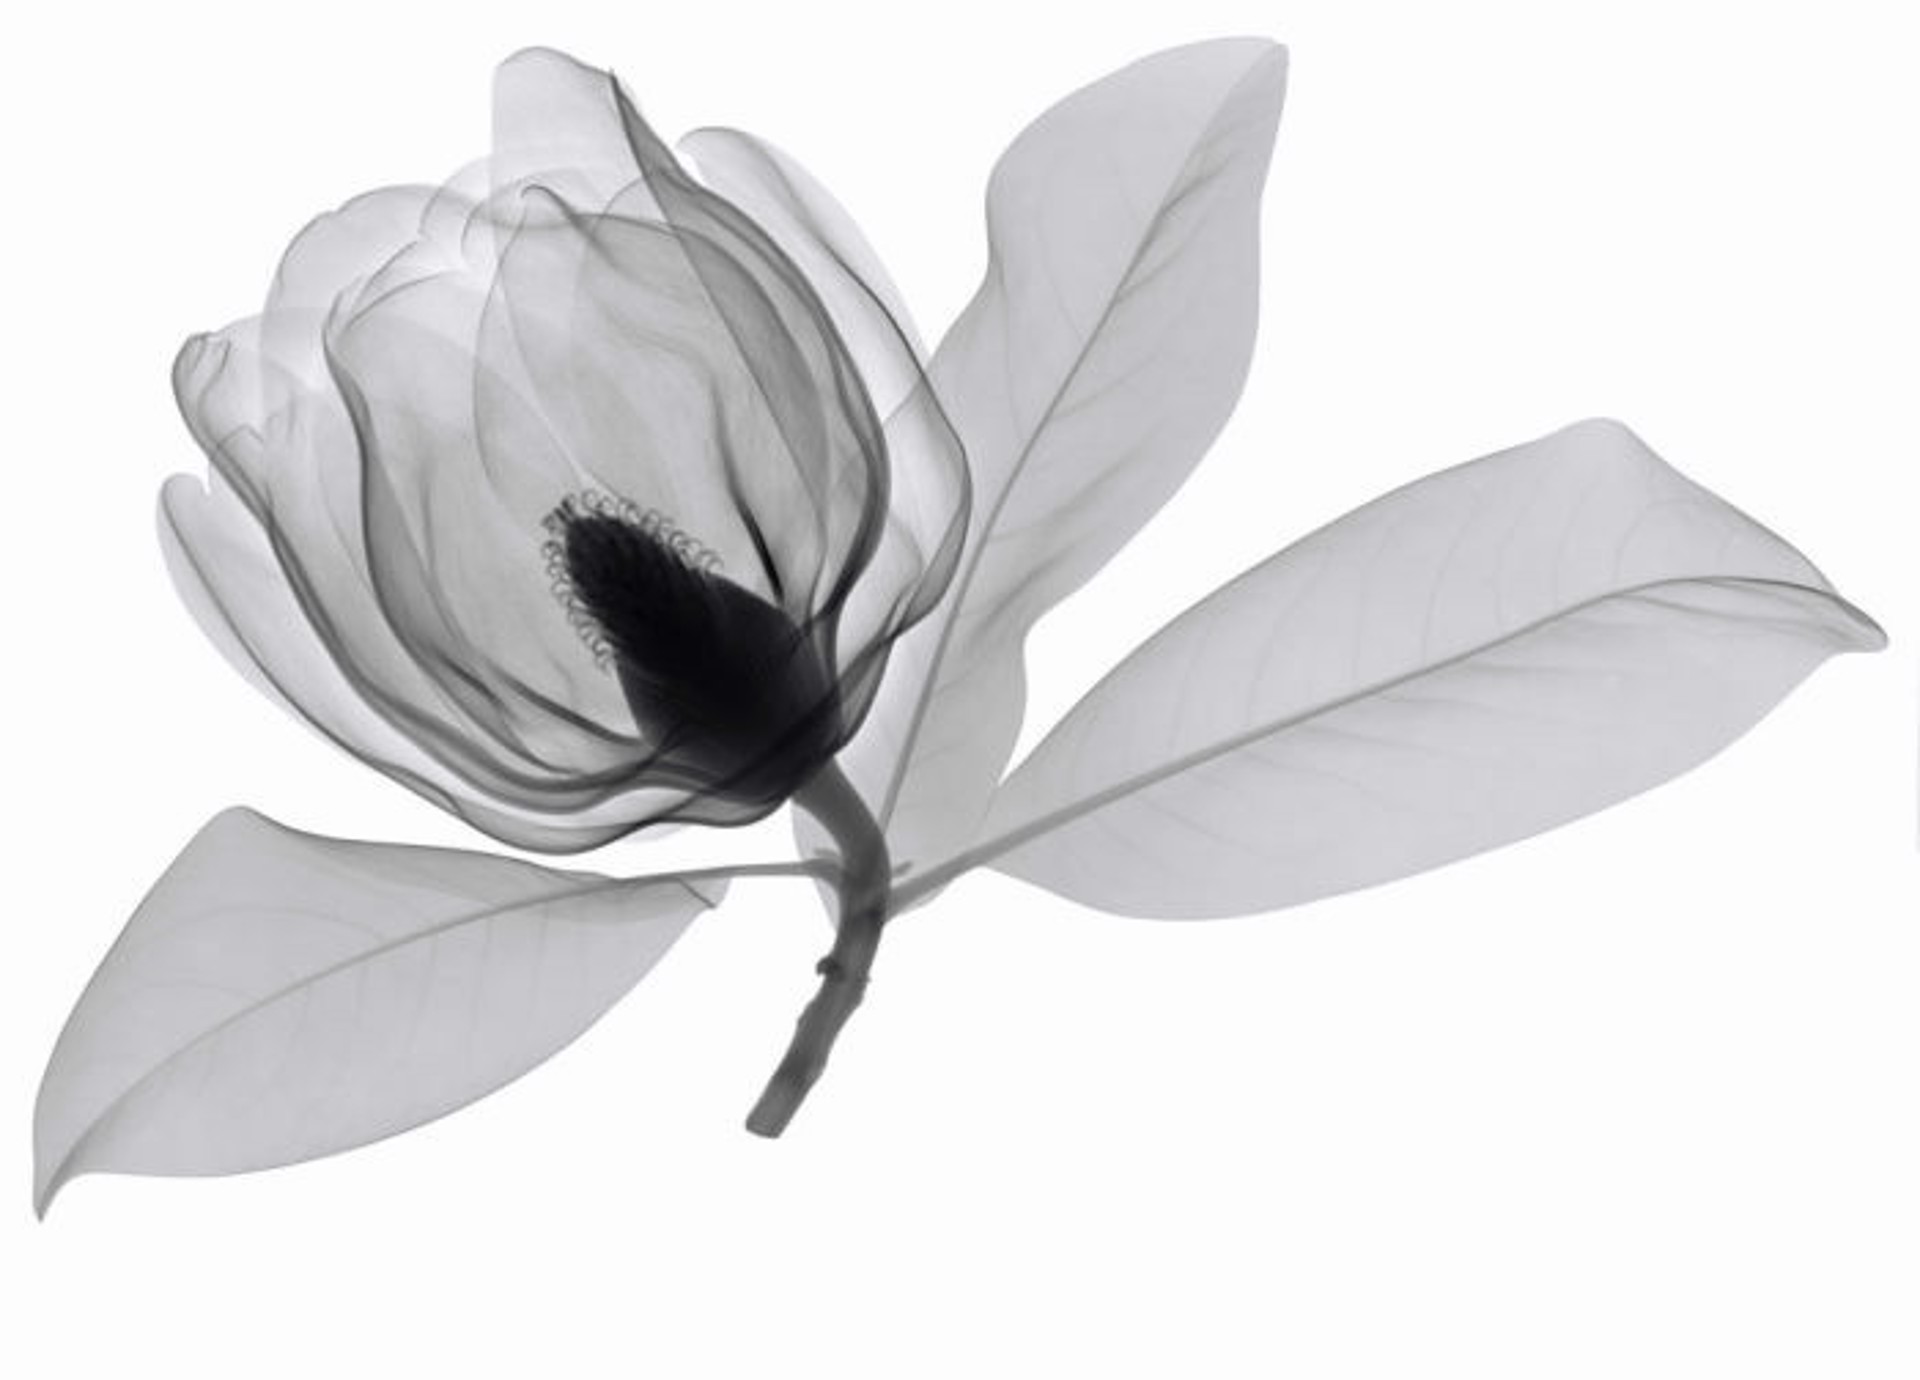 Southern Magnolia 3 by Don Dudenbostel